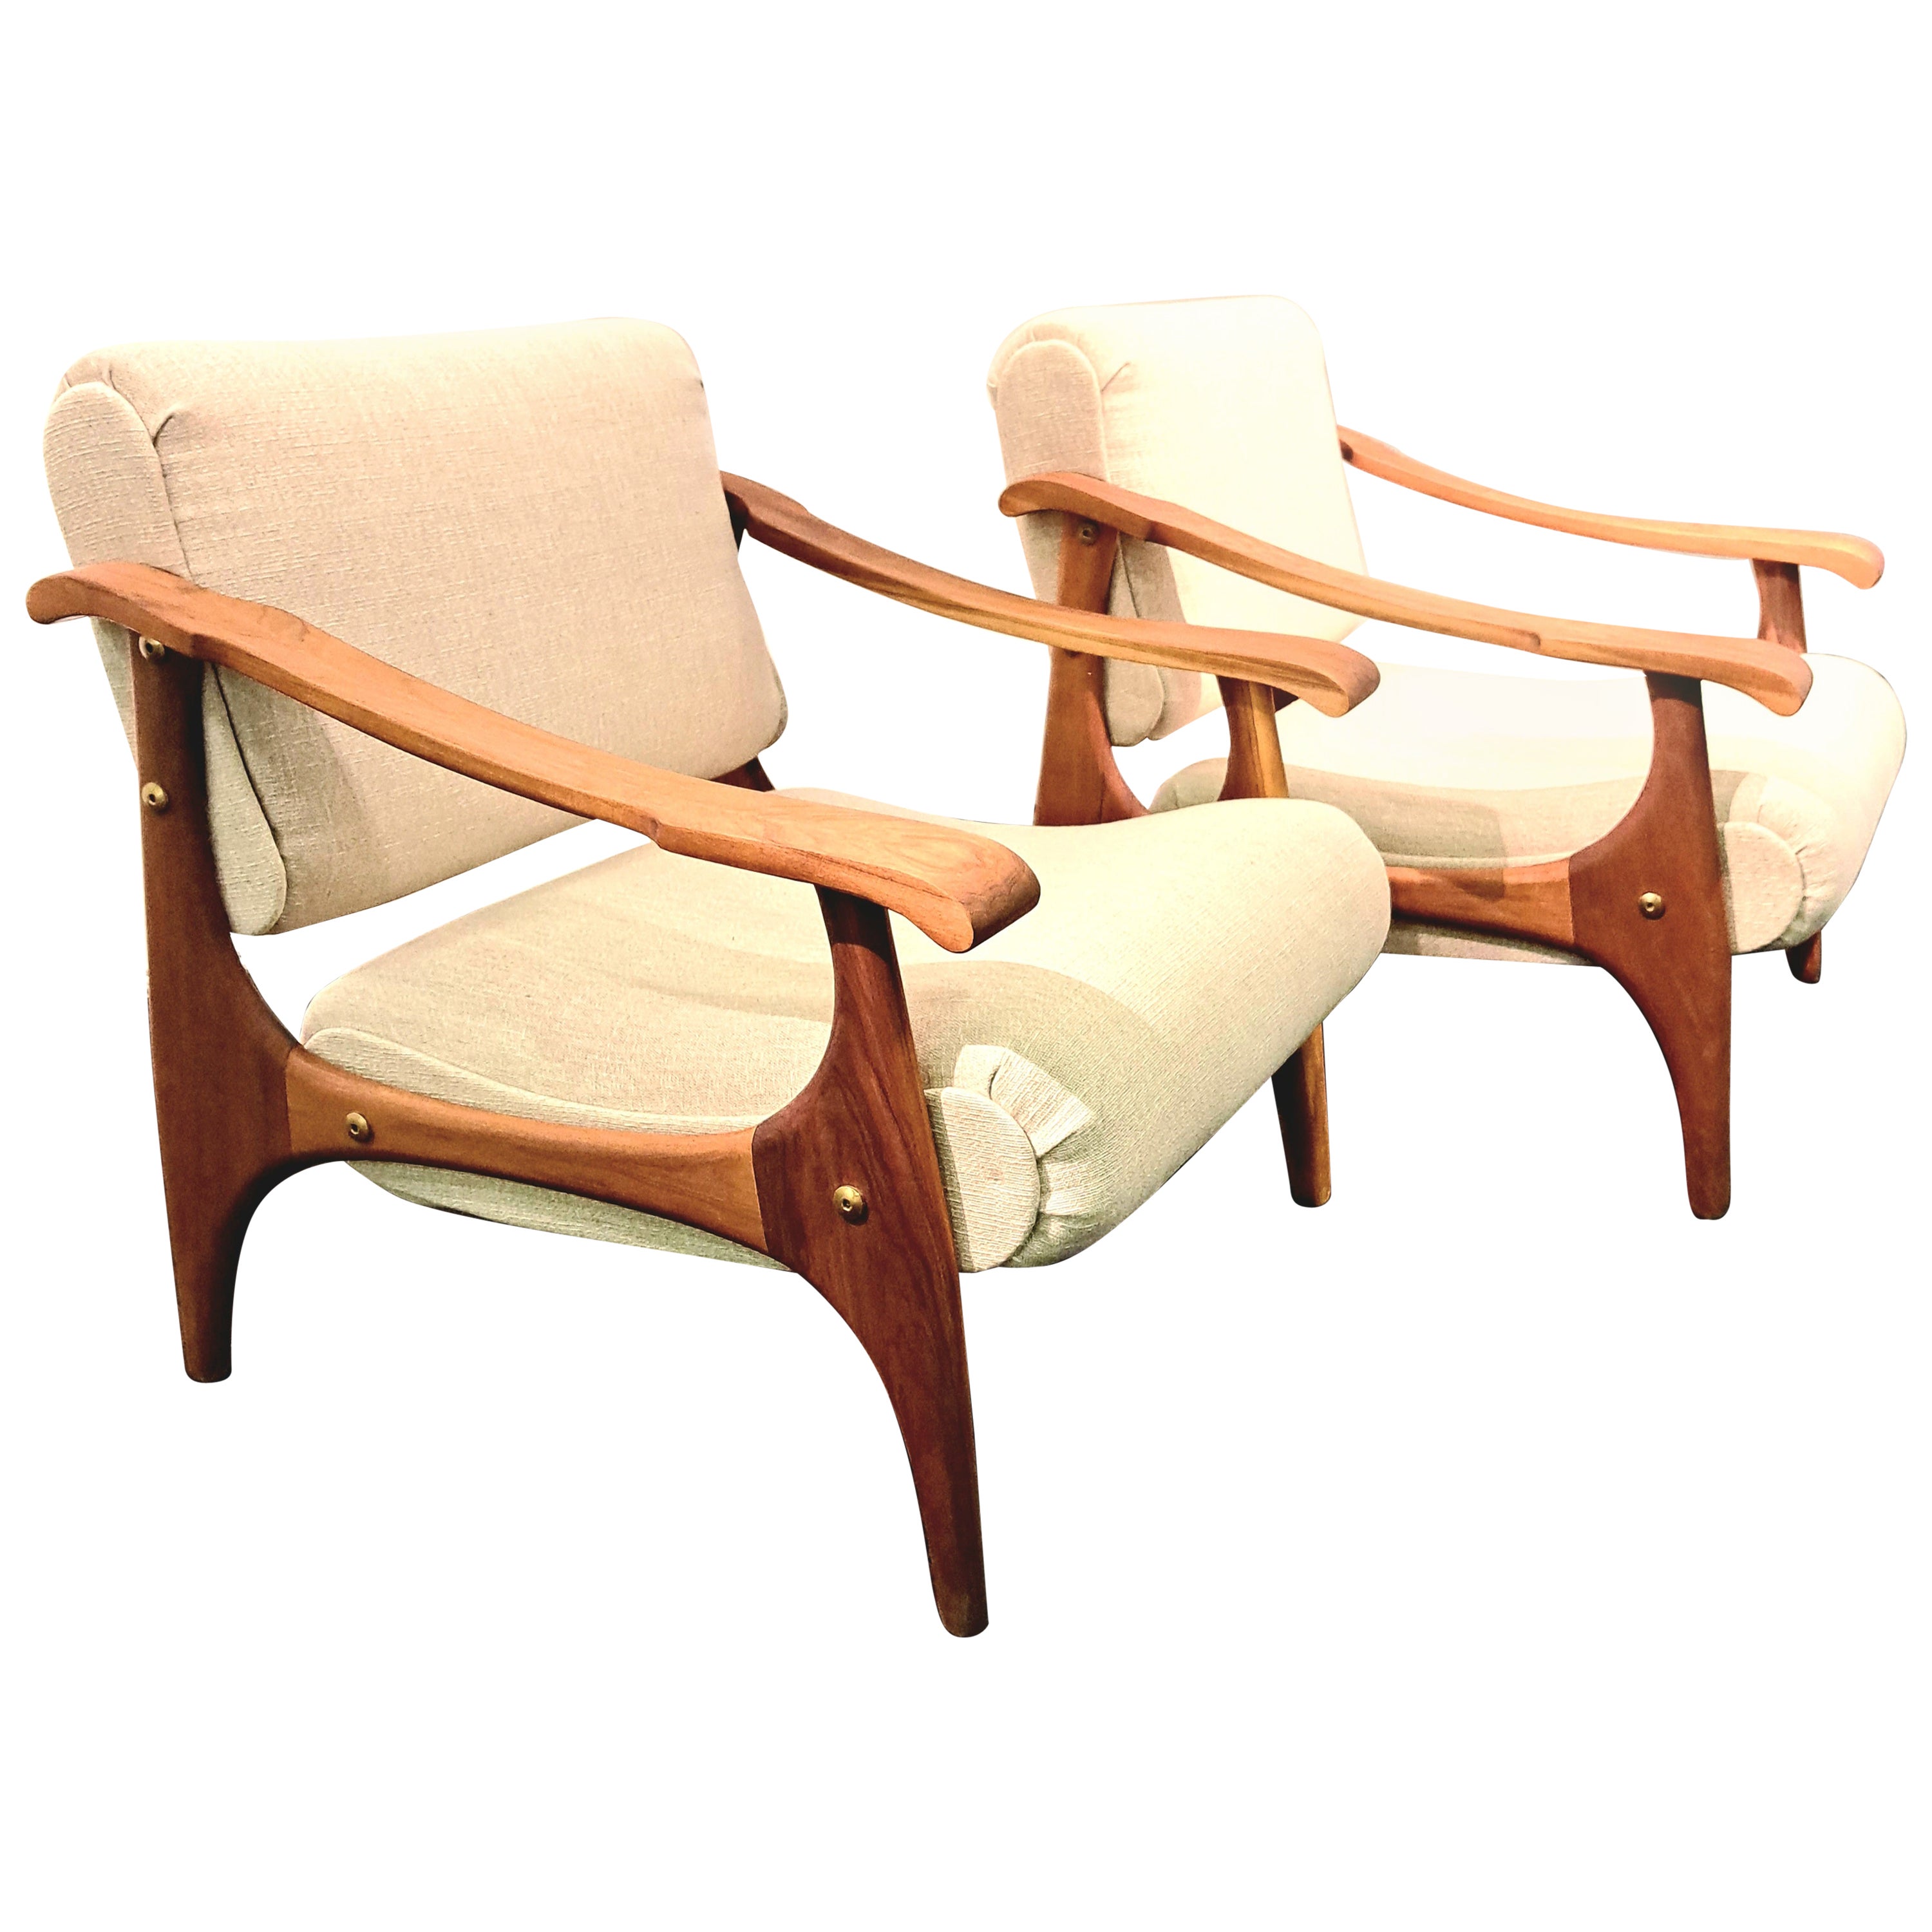 A Pair of Vintage Mid-Century Design lounge chairs, Italy 1970s For Sale